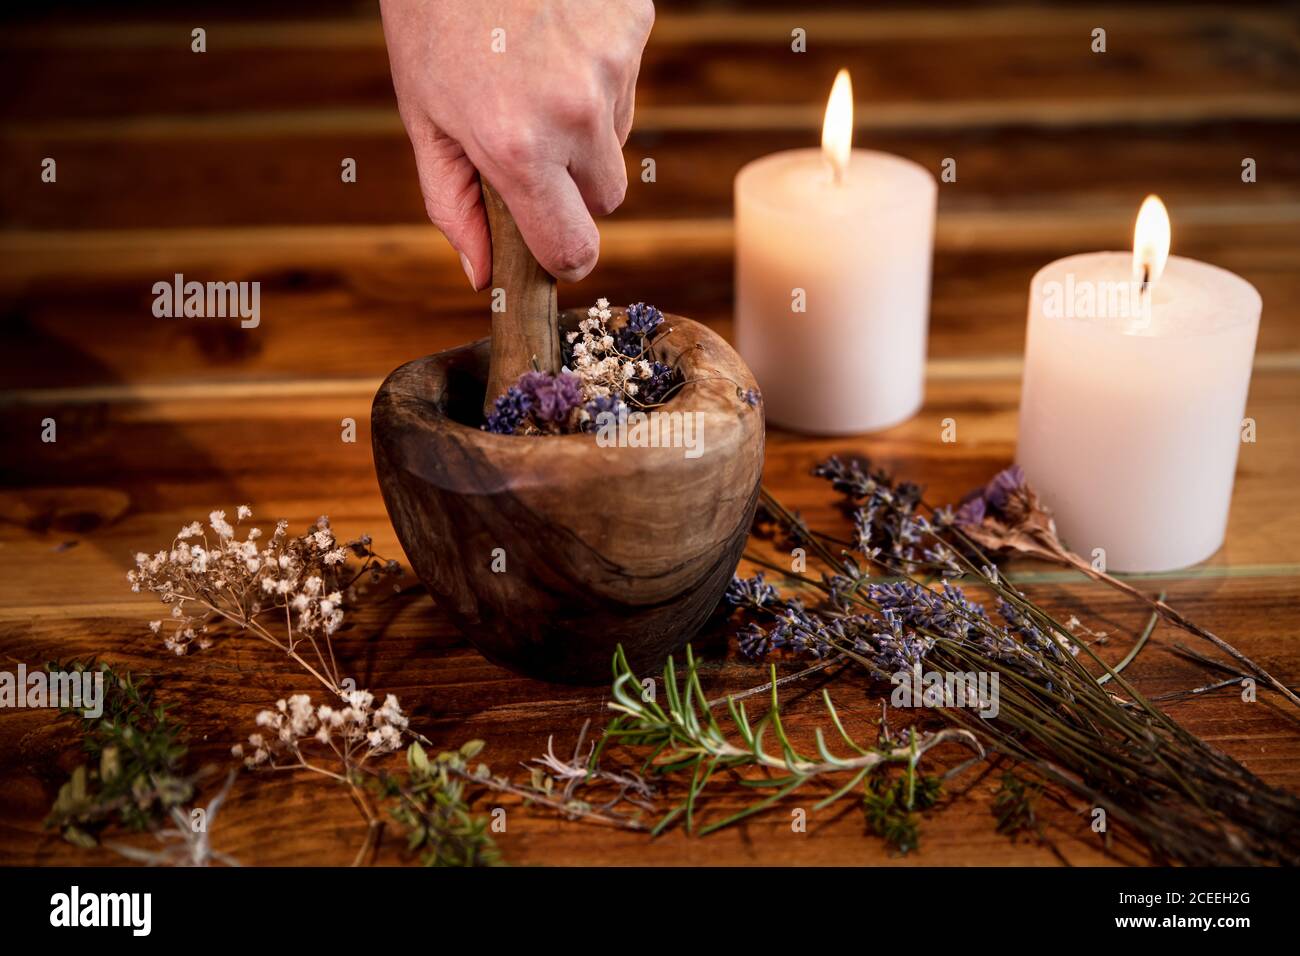 Pulverizing healing herbs and flowers with the mortar, esoteric ingredients for a therapy, female hand Stock Photo